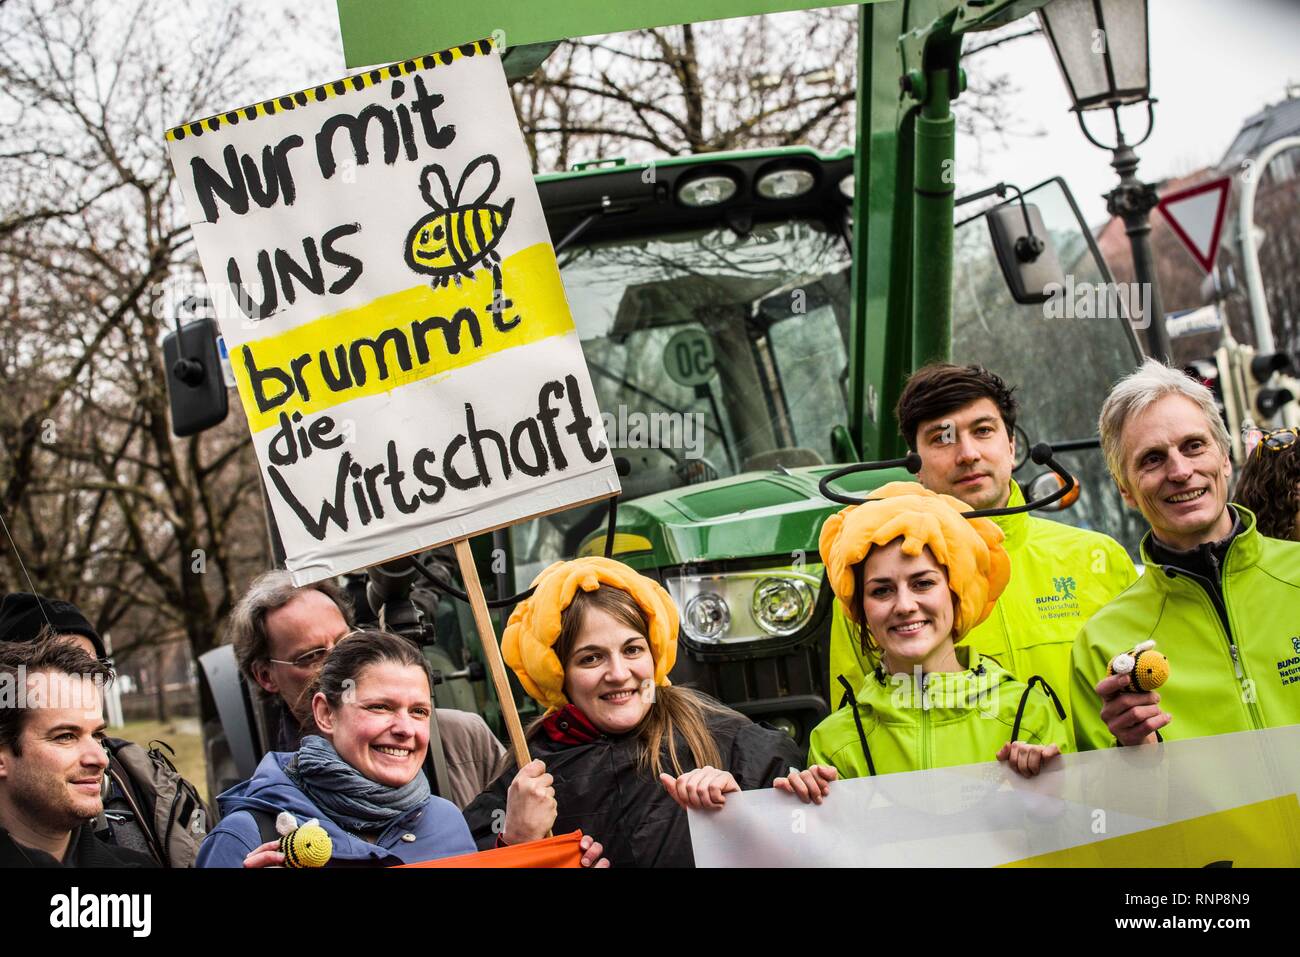 Munich, Bavaria, Germany. 20th Feb, 2019. ''Only with us does the economy buzz''. Activists wear bee outfits as part of the celebration of a successful citizen initiative to save the bees in Bavaria, Germany. After being deemed the most successful citizen initiative in the history of Bavaria with over 1.7 million signatures collected representing 18.4% of Bavaria, the groups behind the Volksbegehren Artenvielfalt, aka Save the Bees and Citizens' Initiative Species Diversity continue their work towards entering the initiative into law. The Save the Bees initiative is designed to put mea Stock Photo